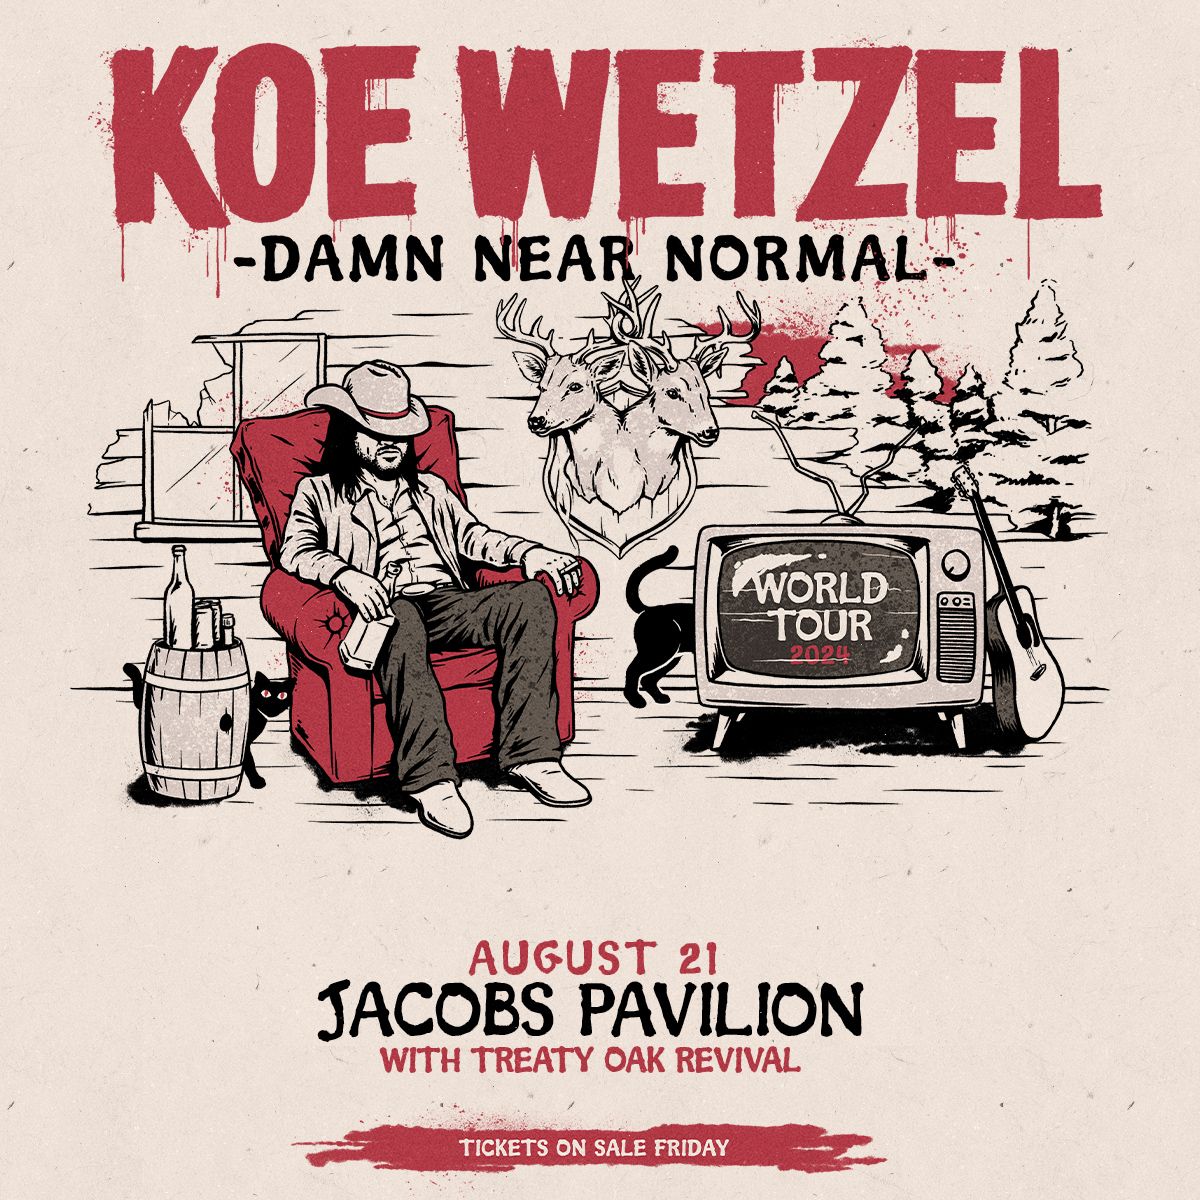 . @koewetzel is taking the Damn Near Normal Tour to Jacobs Pavilion on August 21. Tickets on sale this Friday! Don’t miss a wild night to remember 🔥🎸